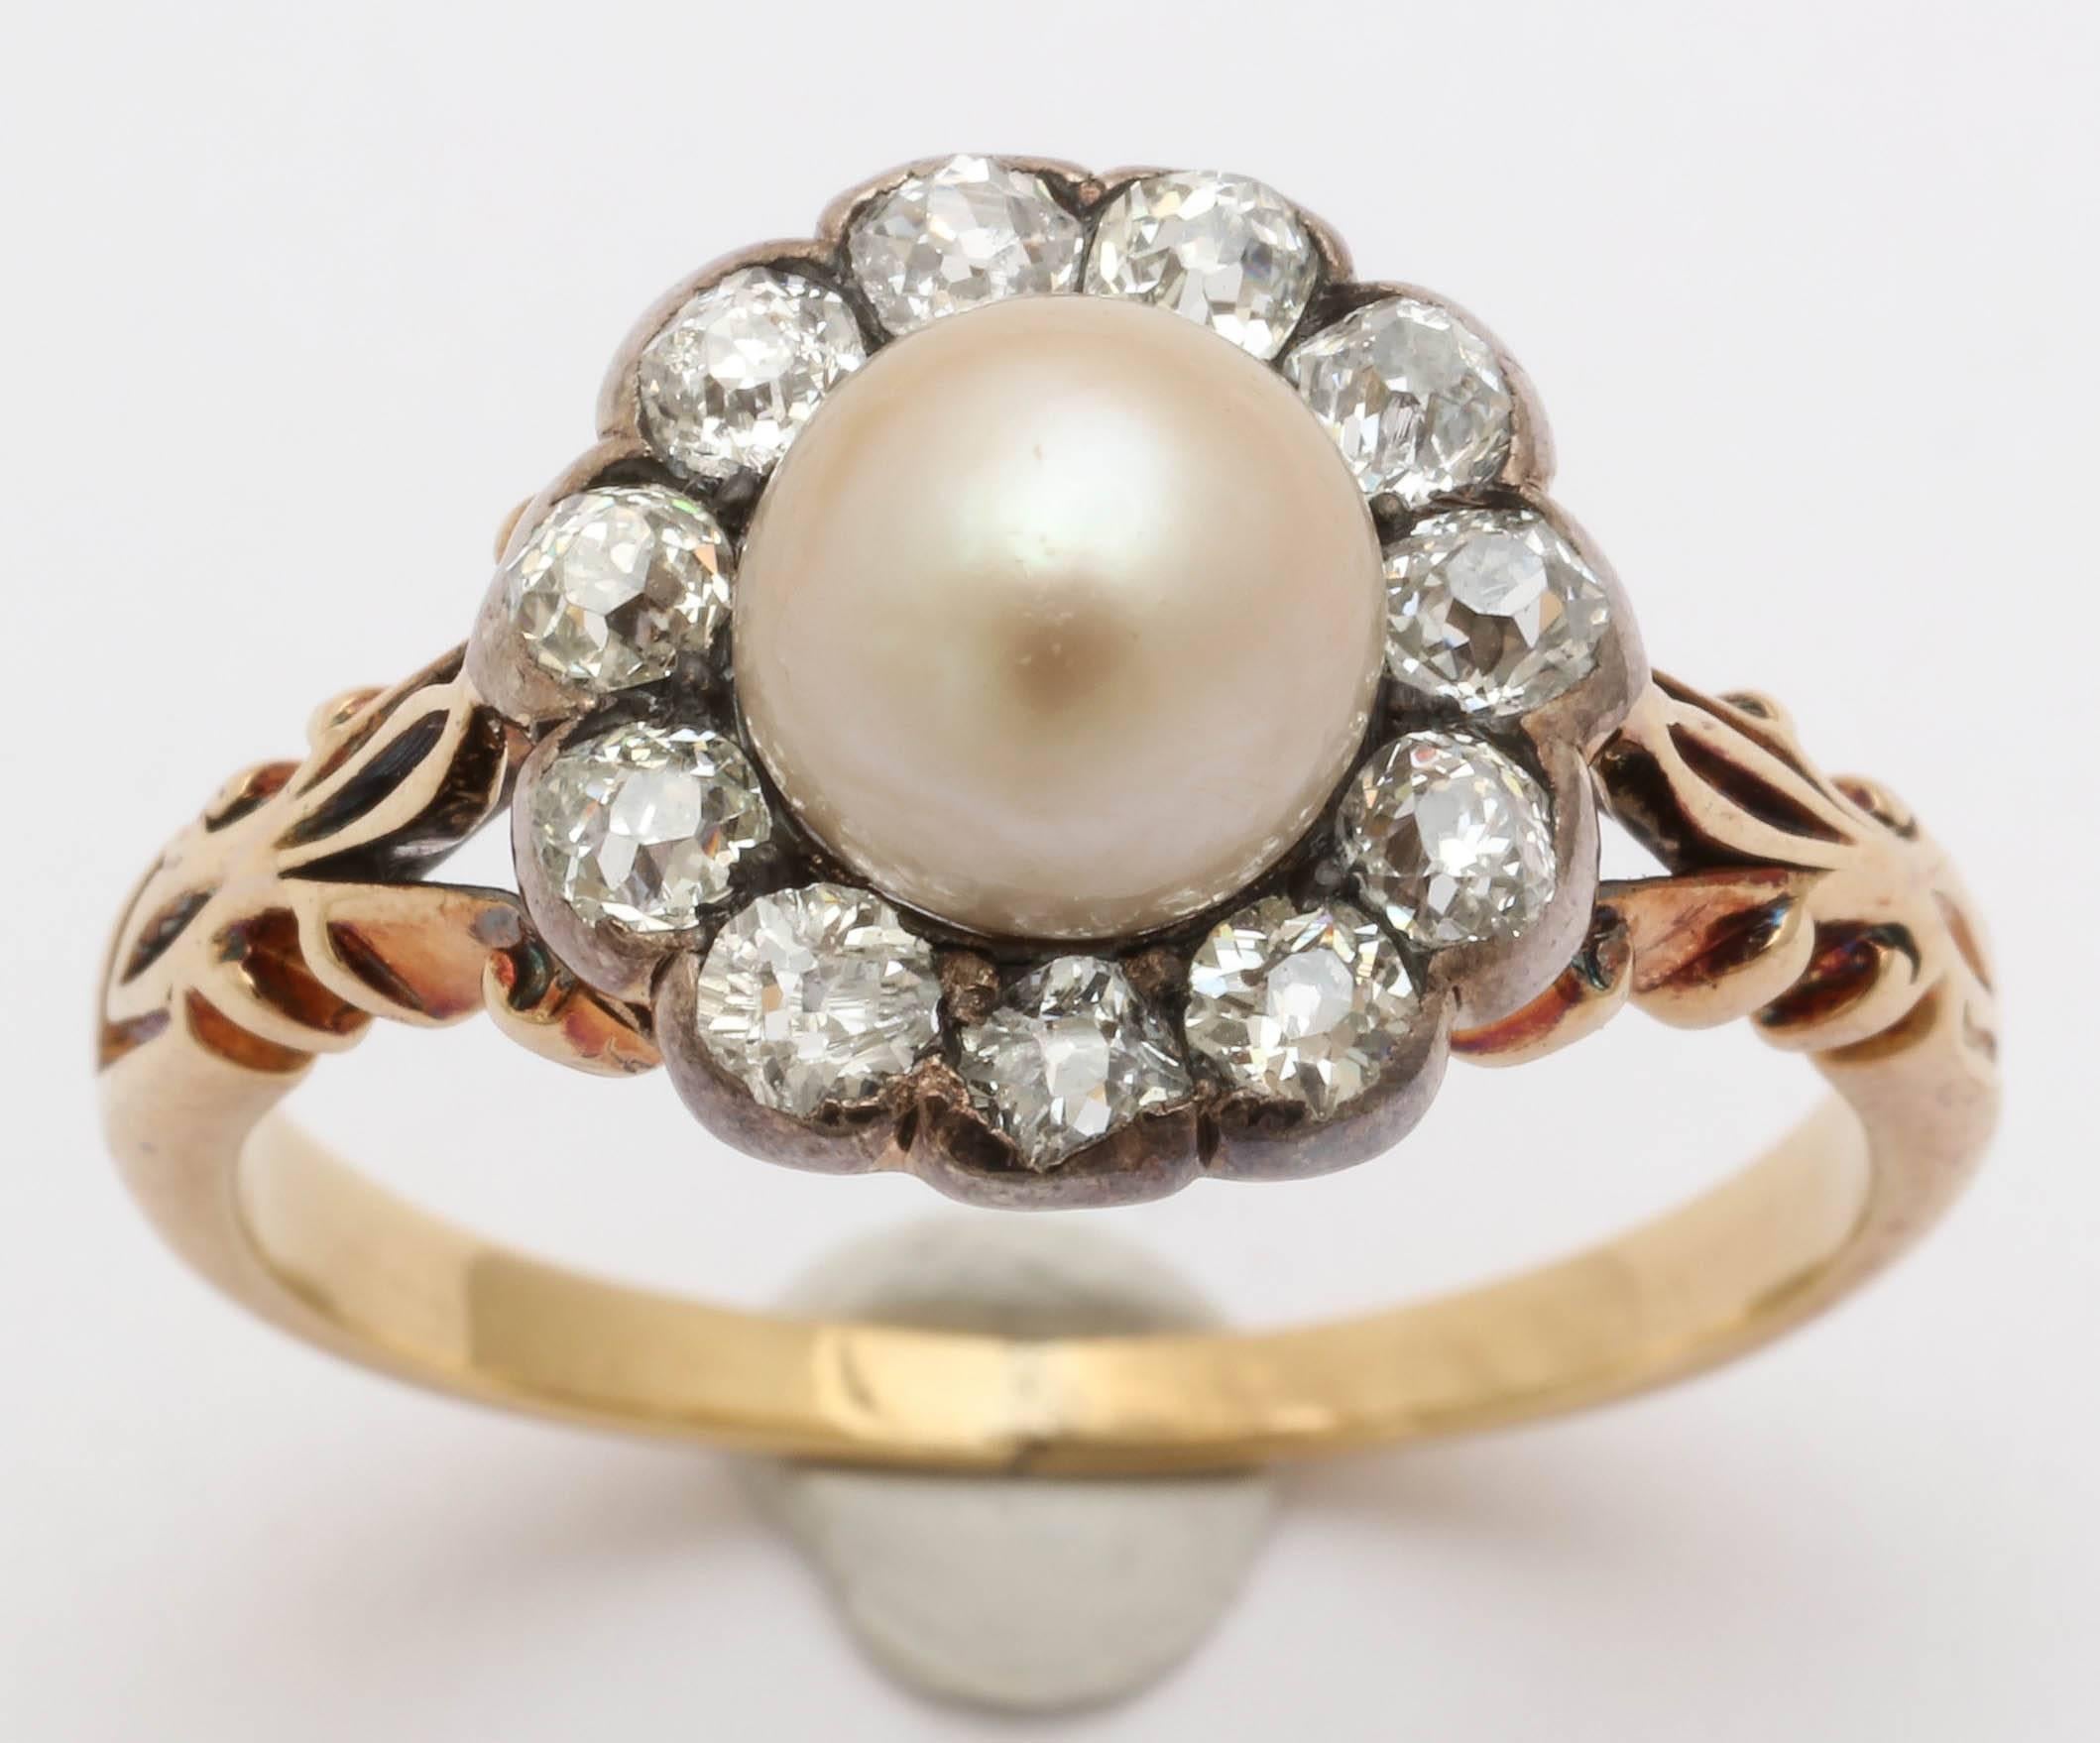 This beautiful Victorian cluster ring is set with a 6mm central pearl surrounded by 11 old mine cut diamonds approximately .5-.7 carats each. The diamonds and pearl are set in silver. Ring is 15kt. Lovely openwork on each shoulder. 